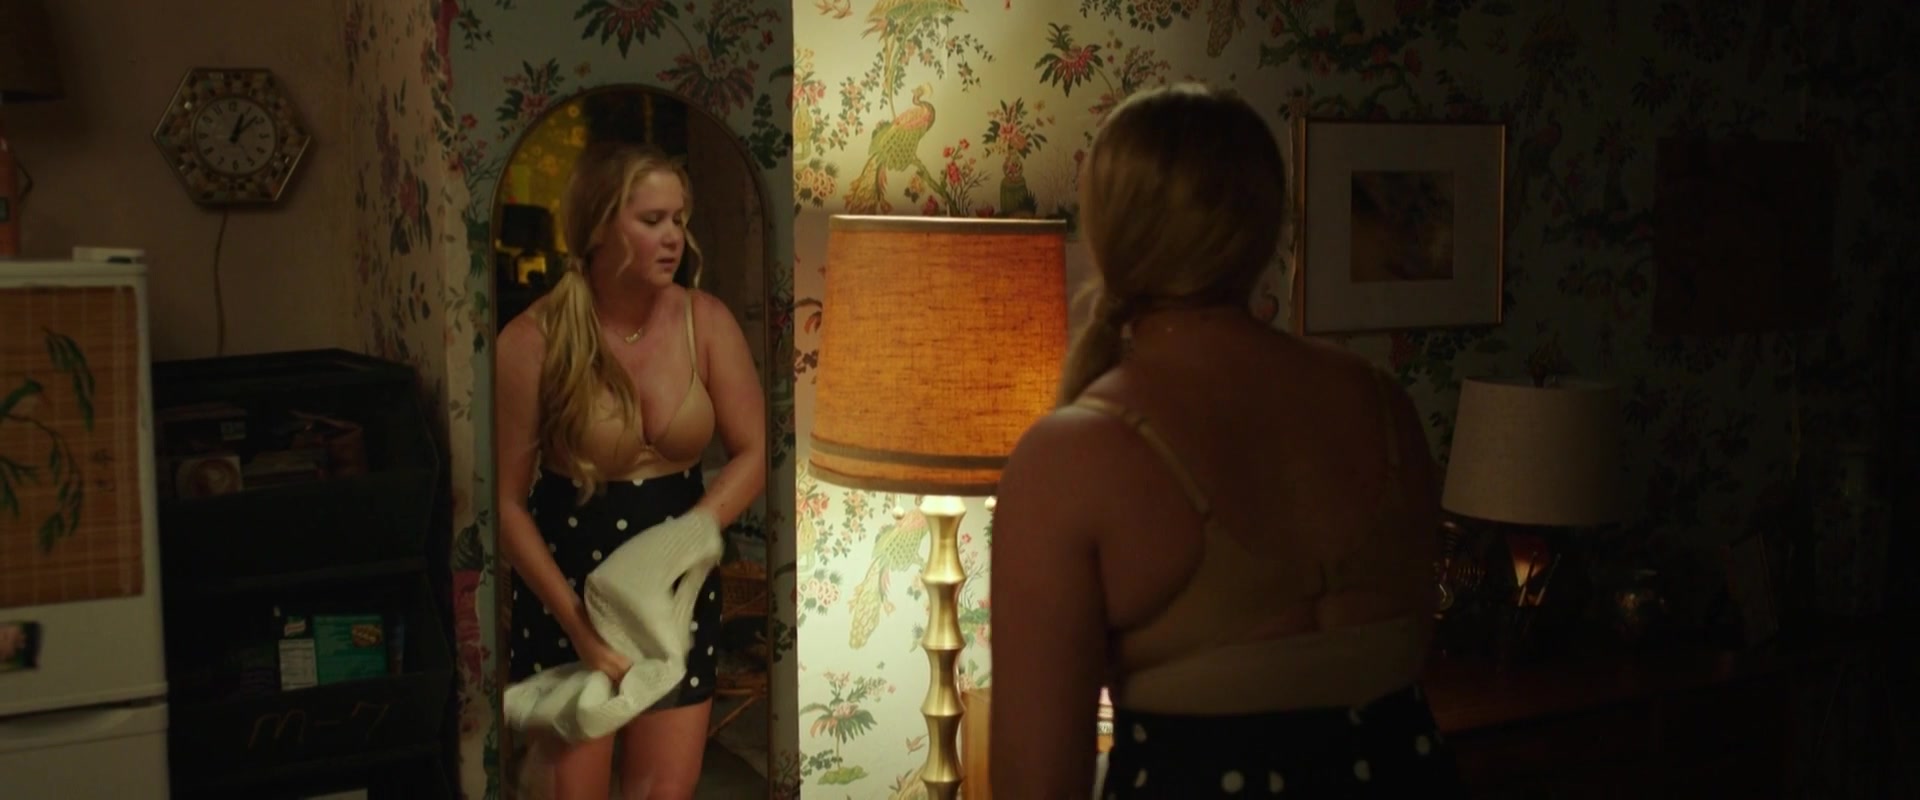 crystal christiansen recommends Amy Schumer Boob Scene